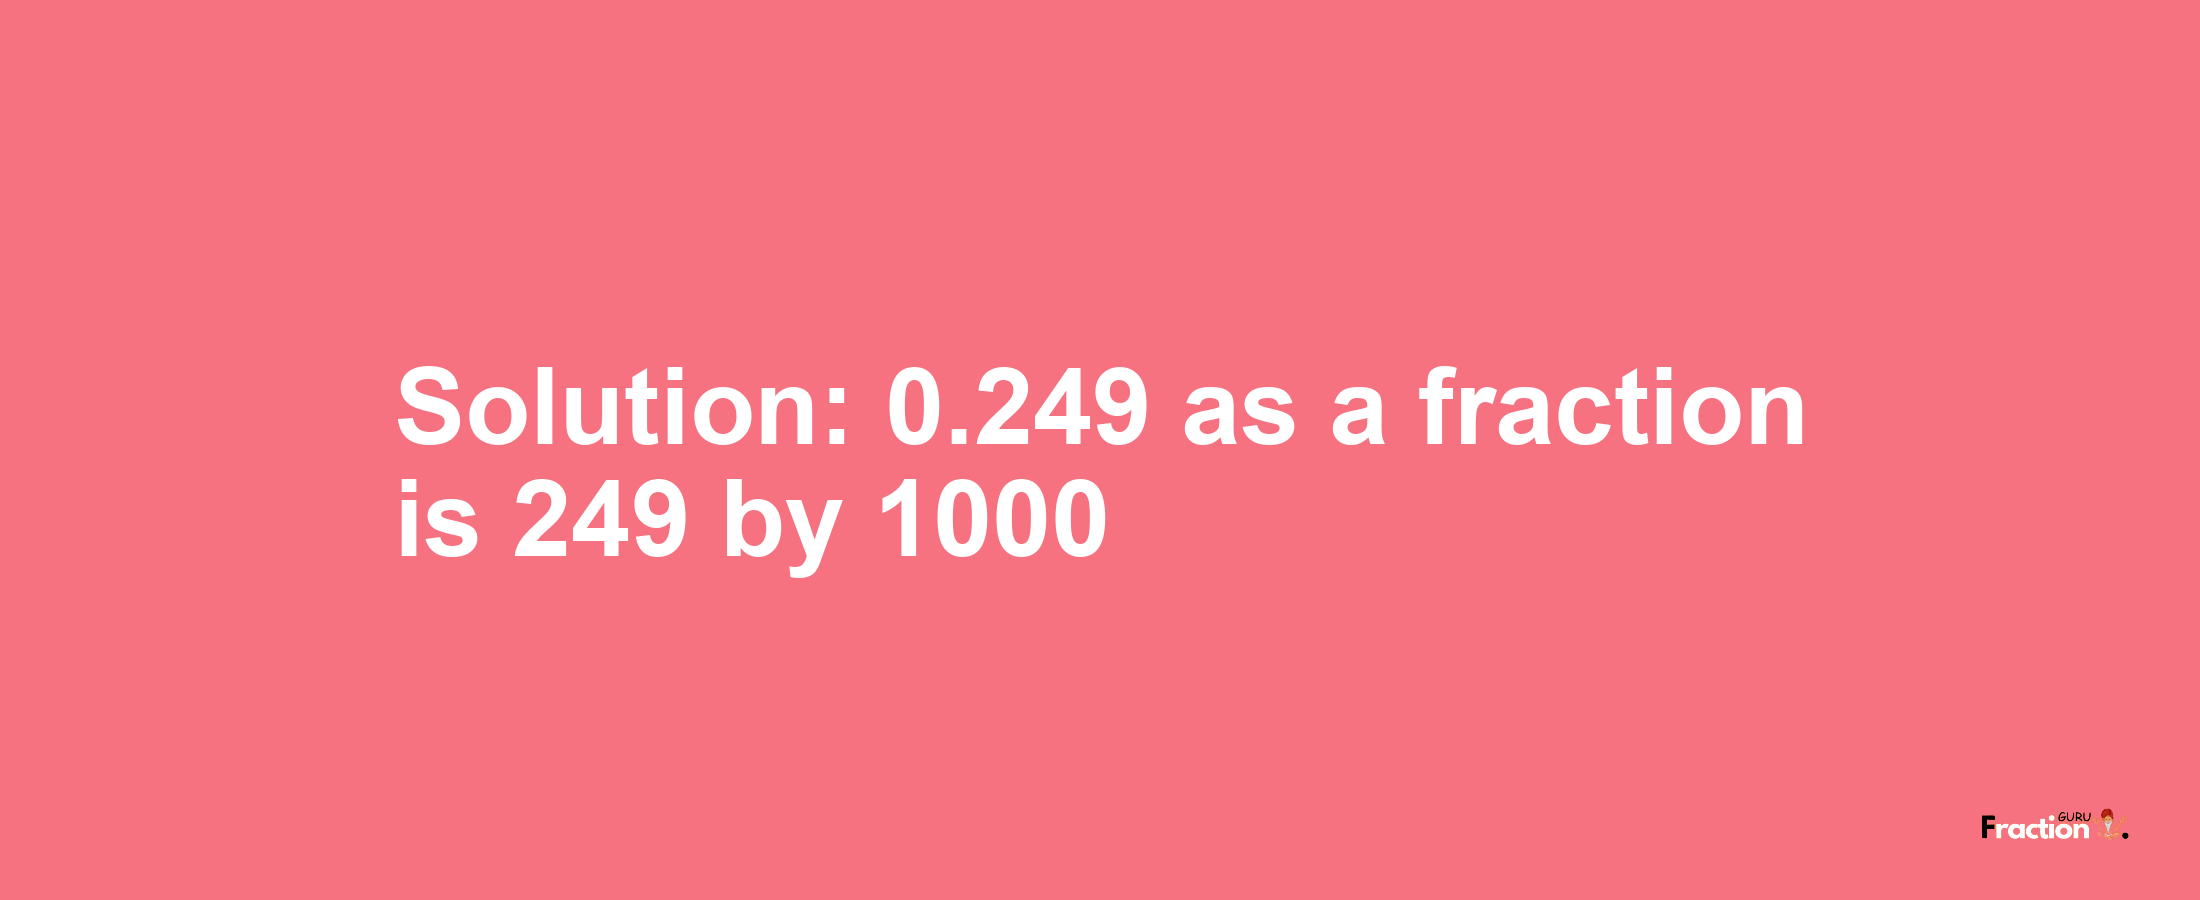 Solution:0.249 as a fraction is 249/1000